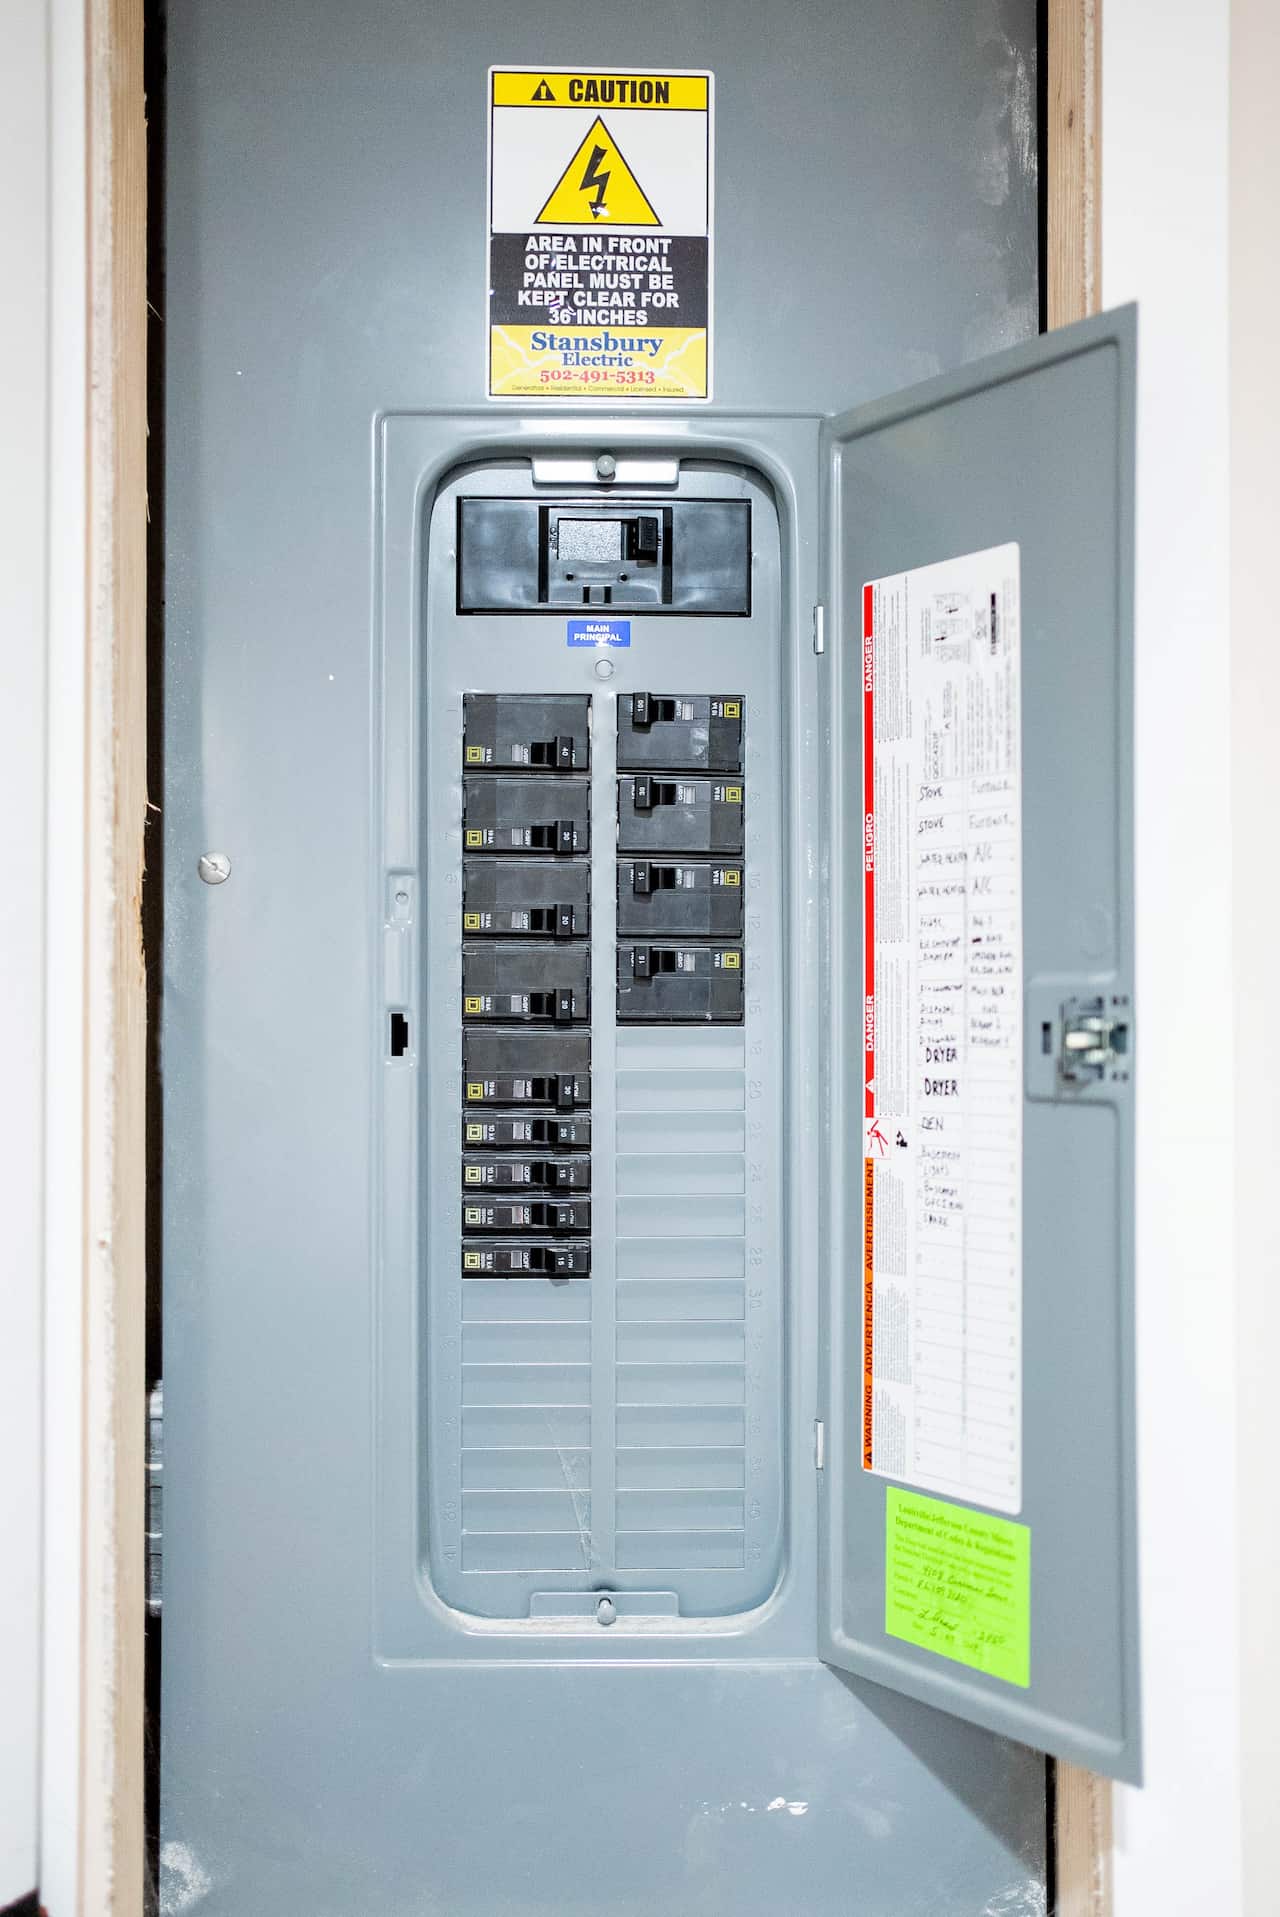 DIY Without Fear | Should Circuit Breakers Be Loose? + 8 Things To Look Out For